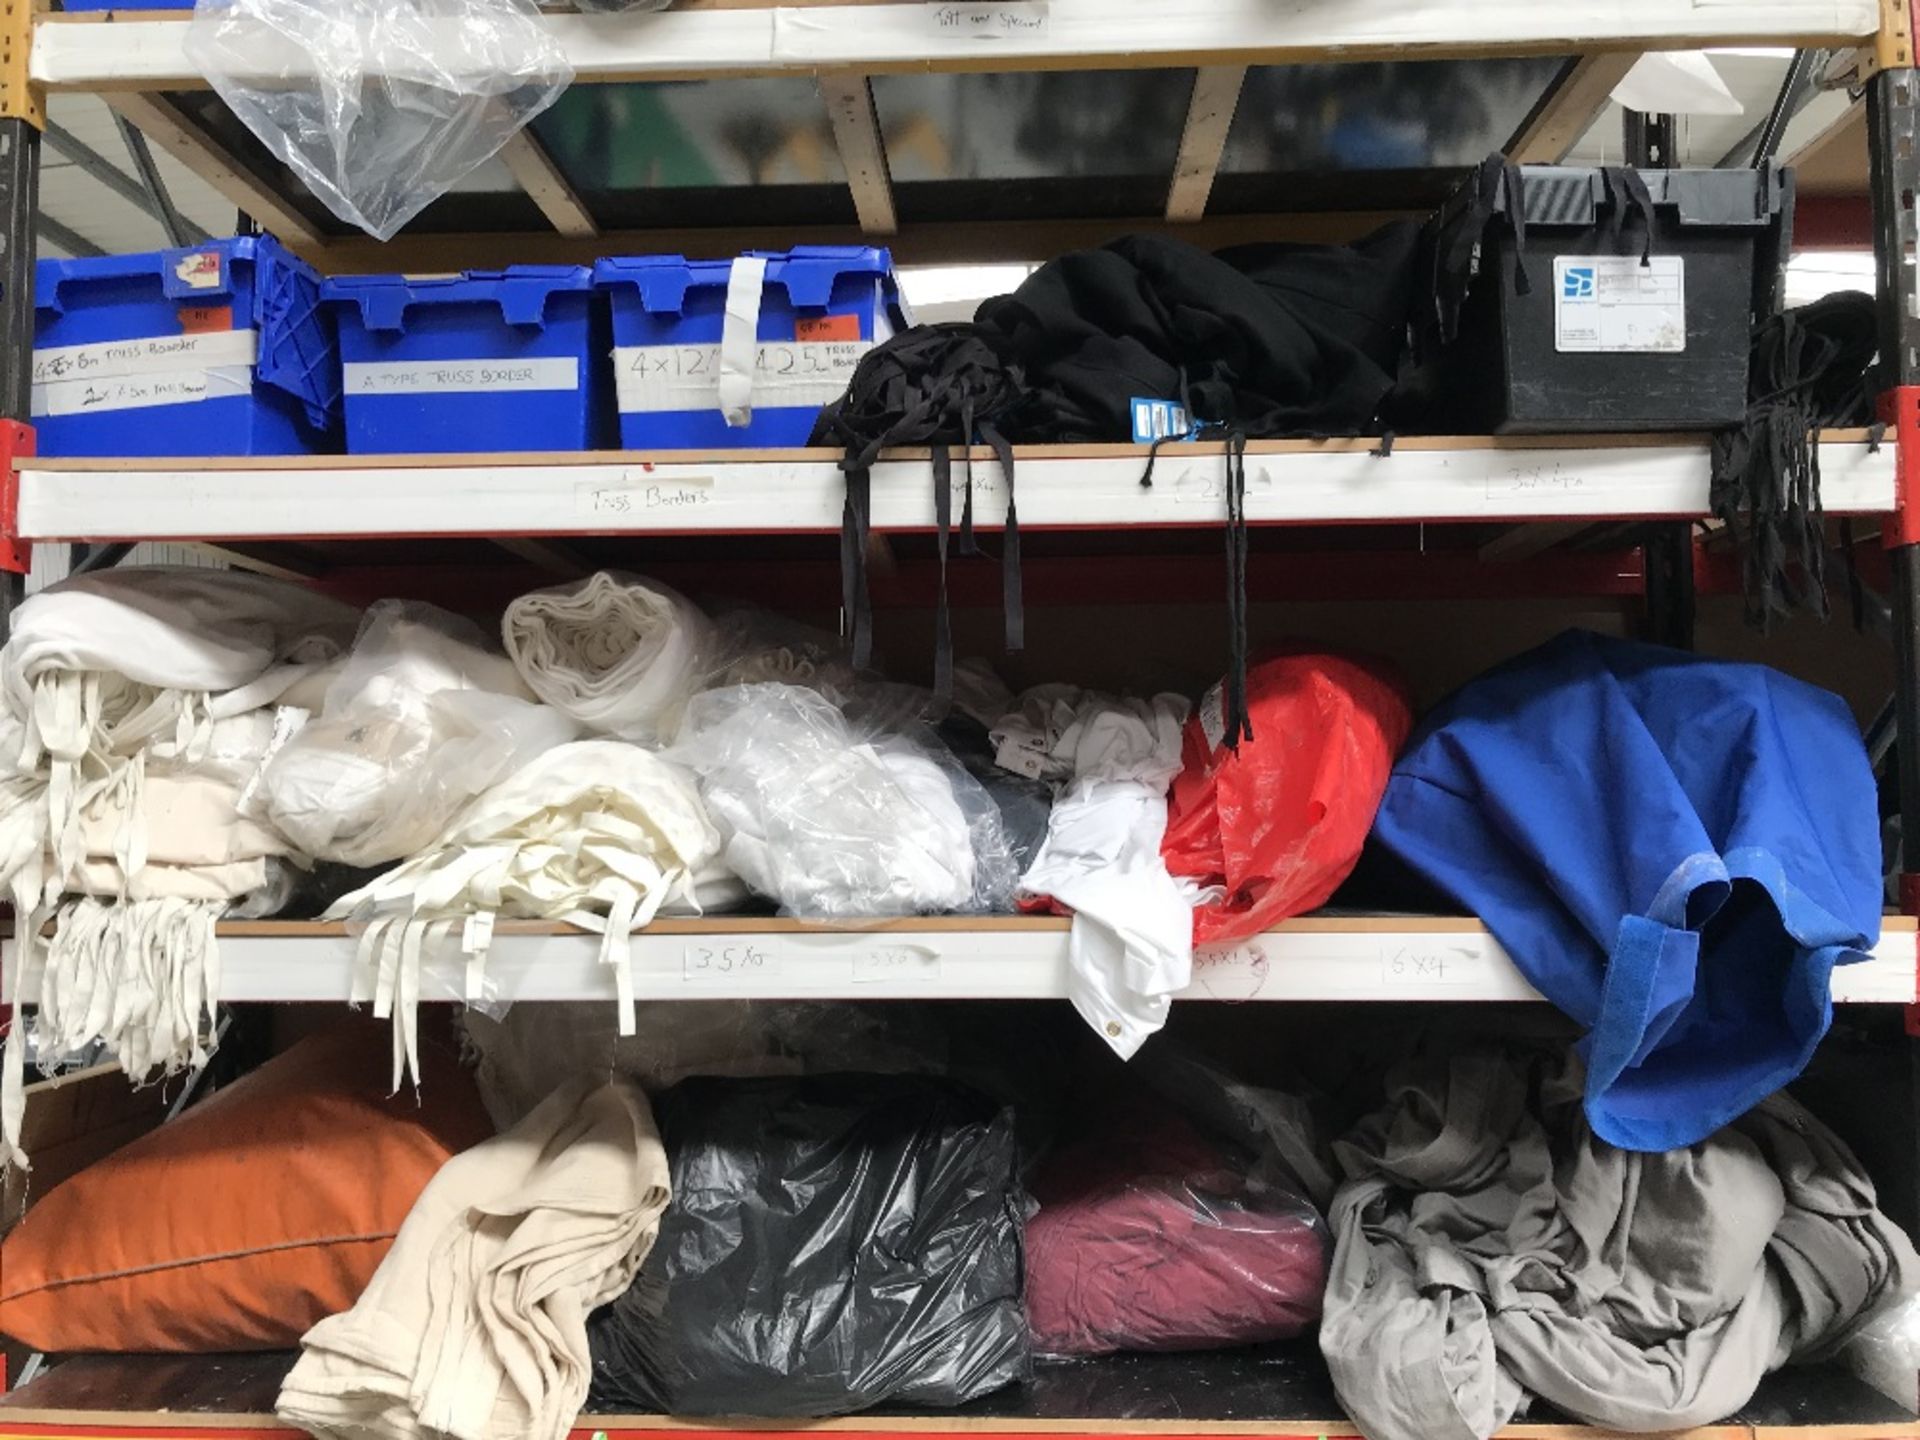 Contents of Racking to Include Large Quantity of Drapes & Accessories